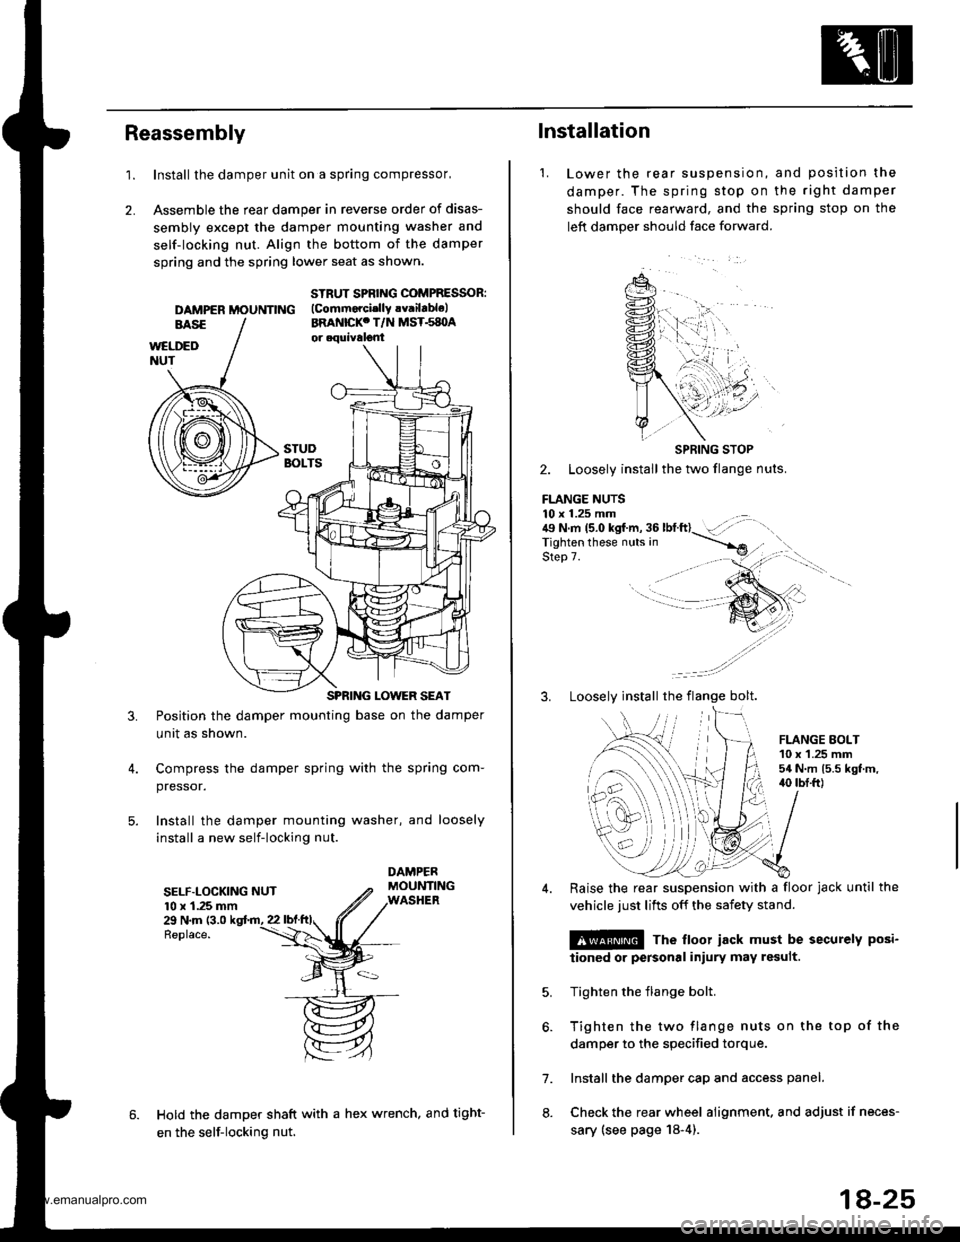 HONDA CR-V 1998 RD1-RD3 / 1.G Workshop Manual 
Reassembly
1.Install the damper unit on a spring compressor,
Assemble the rear damper in reverse order of disas-
sembly except the damper mounting washer and
self-locking nut. Align the bottom of the